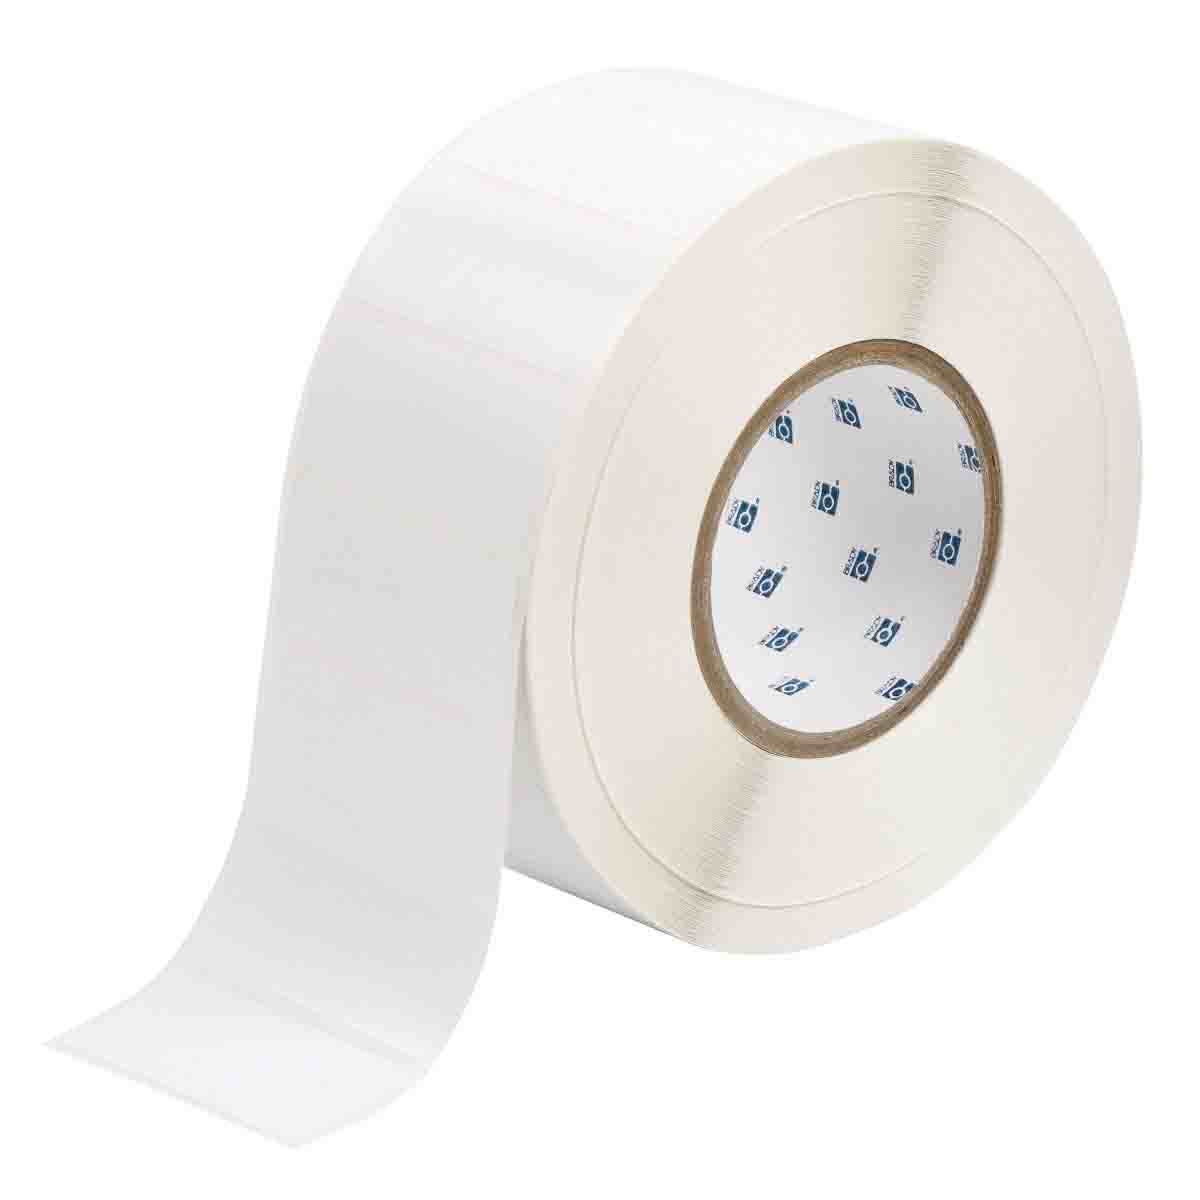 NEW Brady B-483 Thermal Roll Labels PTL-8-483 0.5 in x 50 ft White